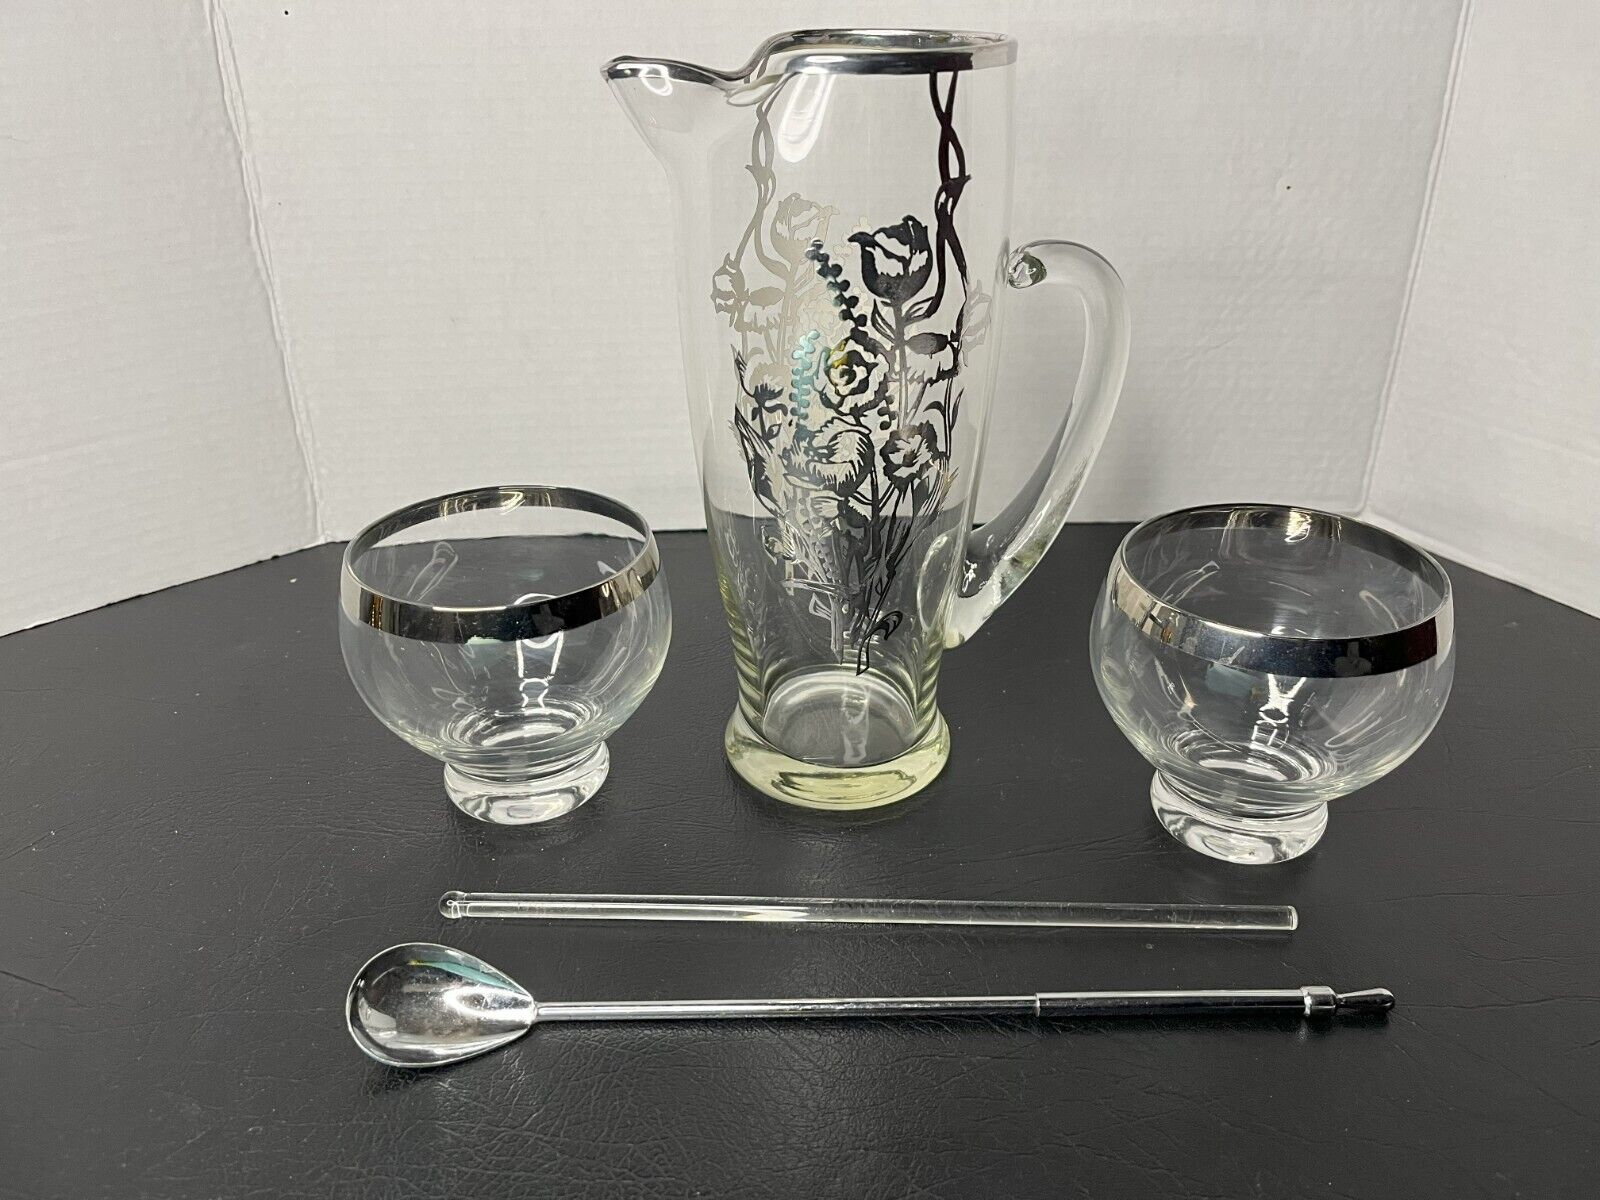 Vintage Silver Overlay Cocktail Pitcher w/ Stir Stick, Mixing Spoon & 4 Glasses